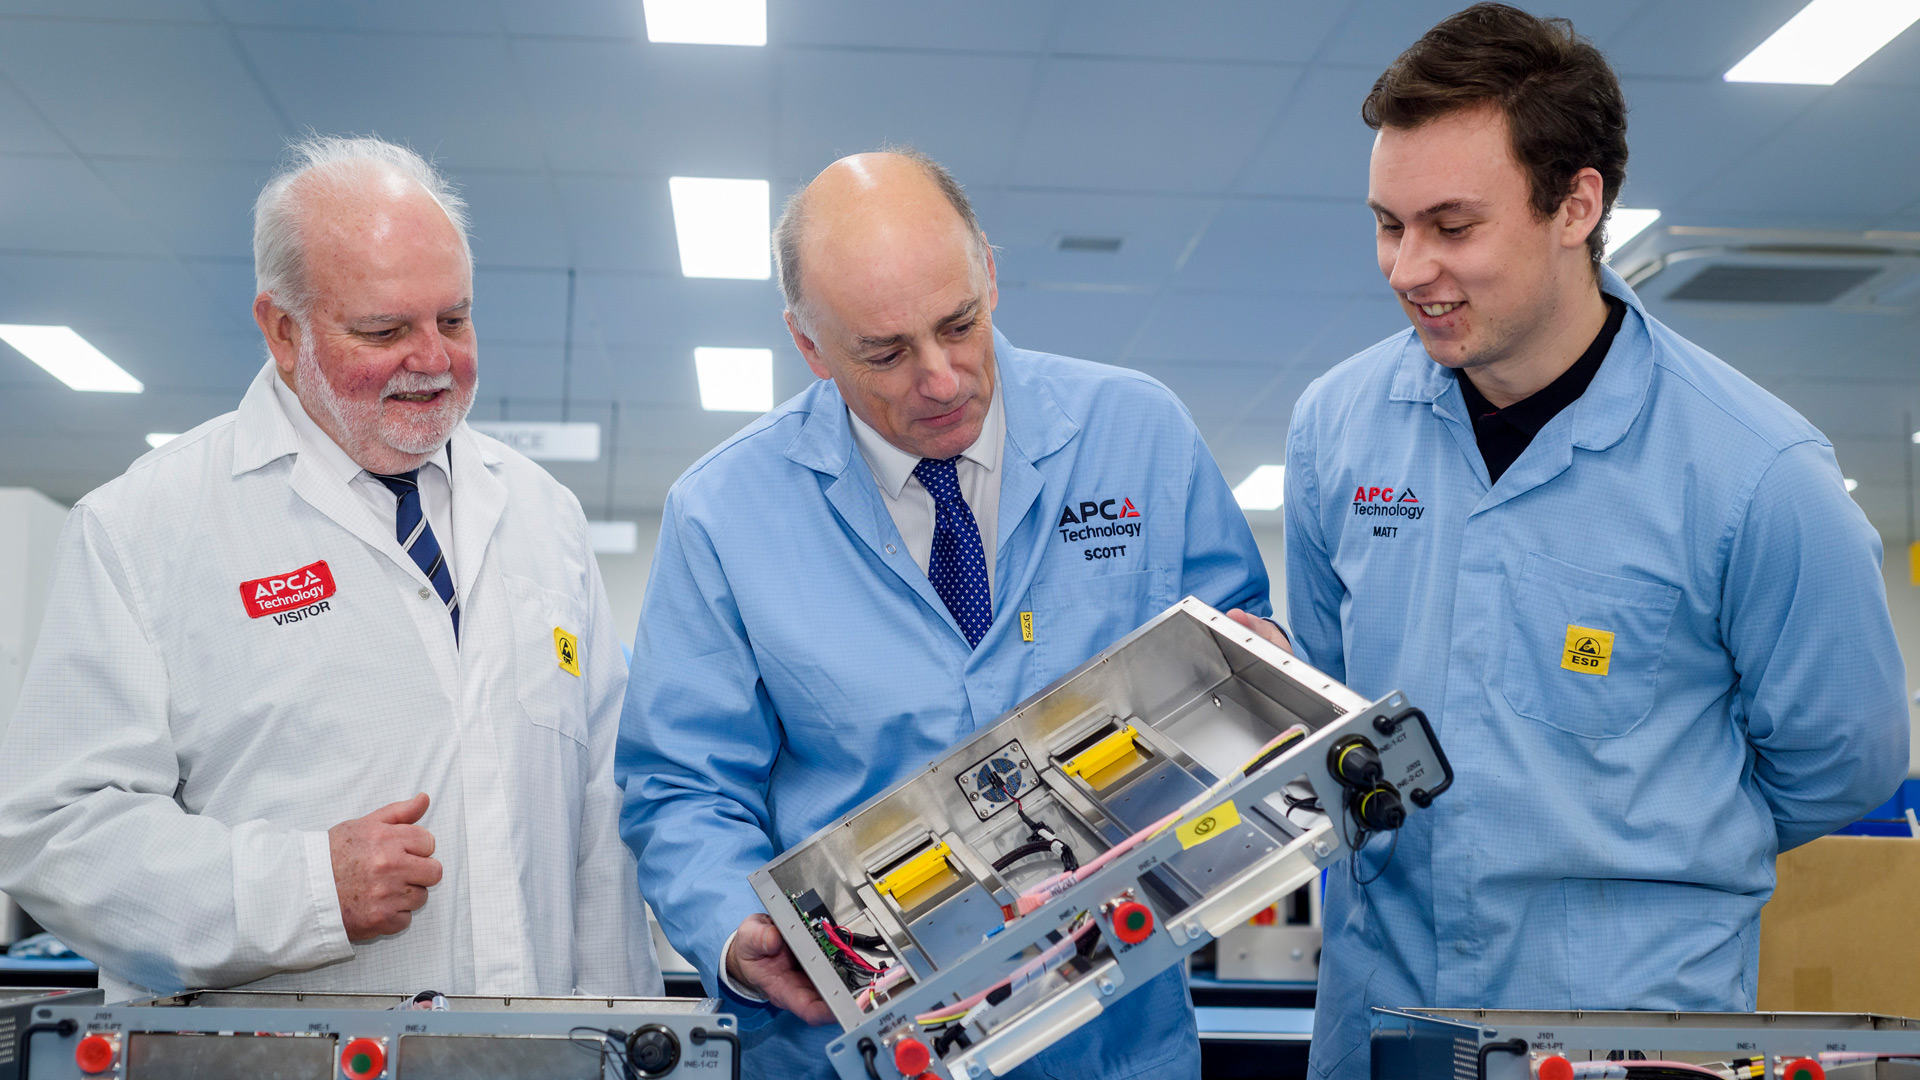 Engineering student Matthew Cave with the team at APC Technology